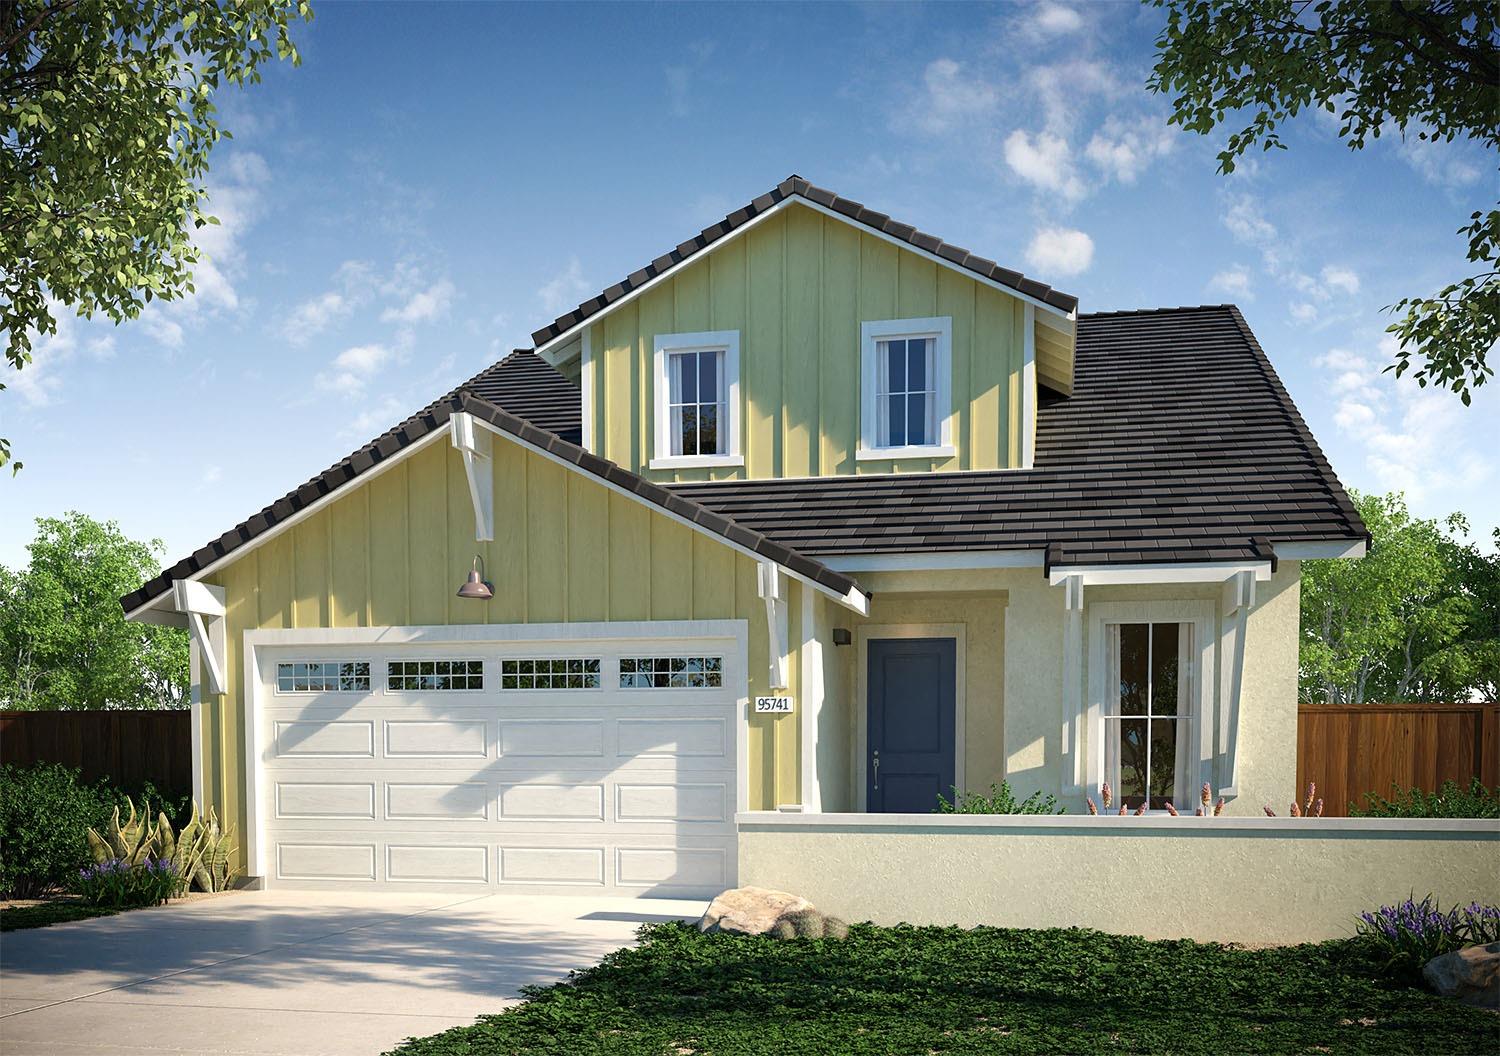 Mills Station at Cresleigh Ranch is a Cresleigh Home's solar community in Rancho Cordova. This is a 